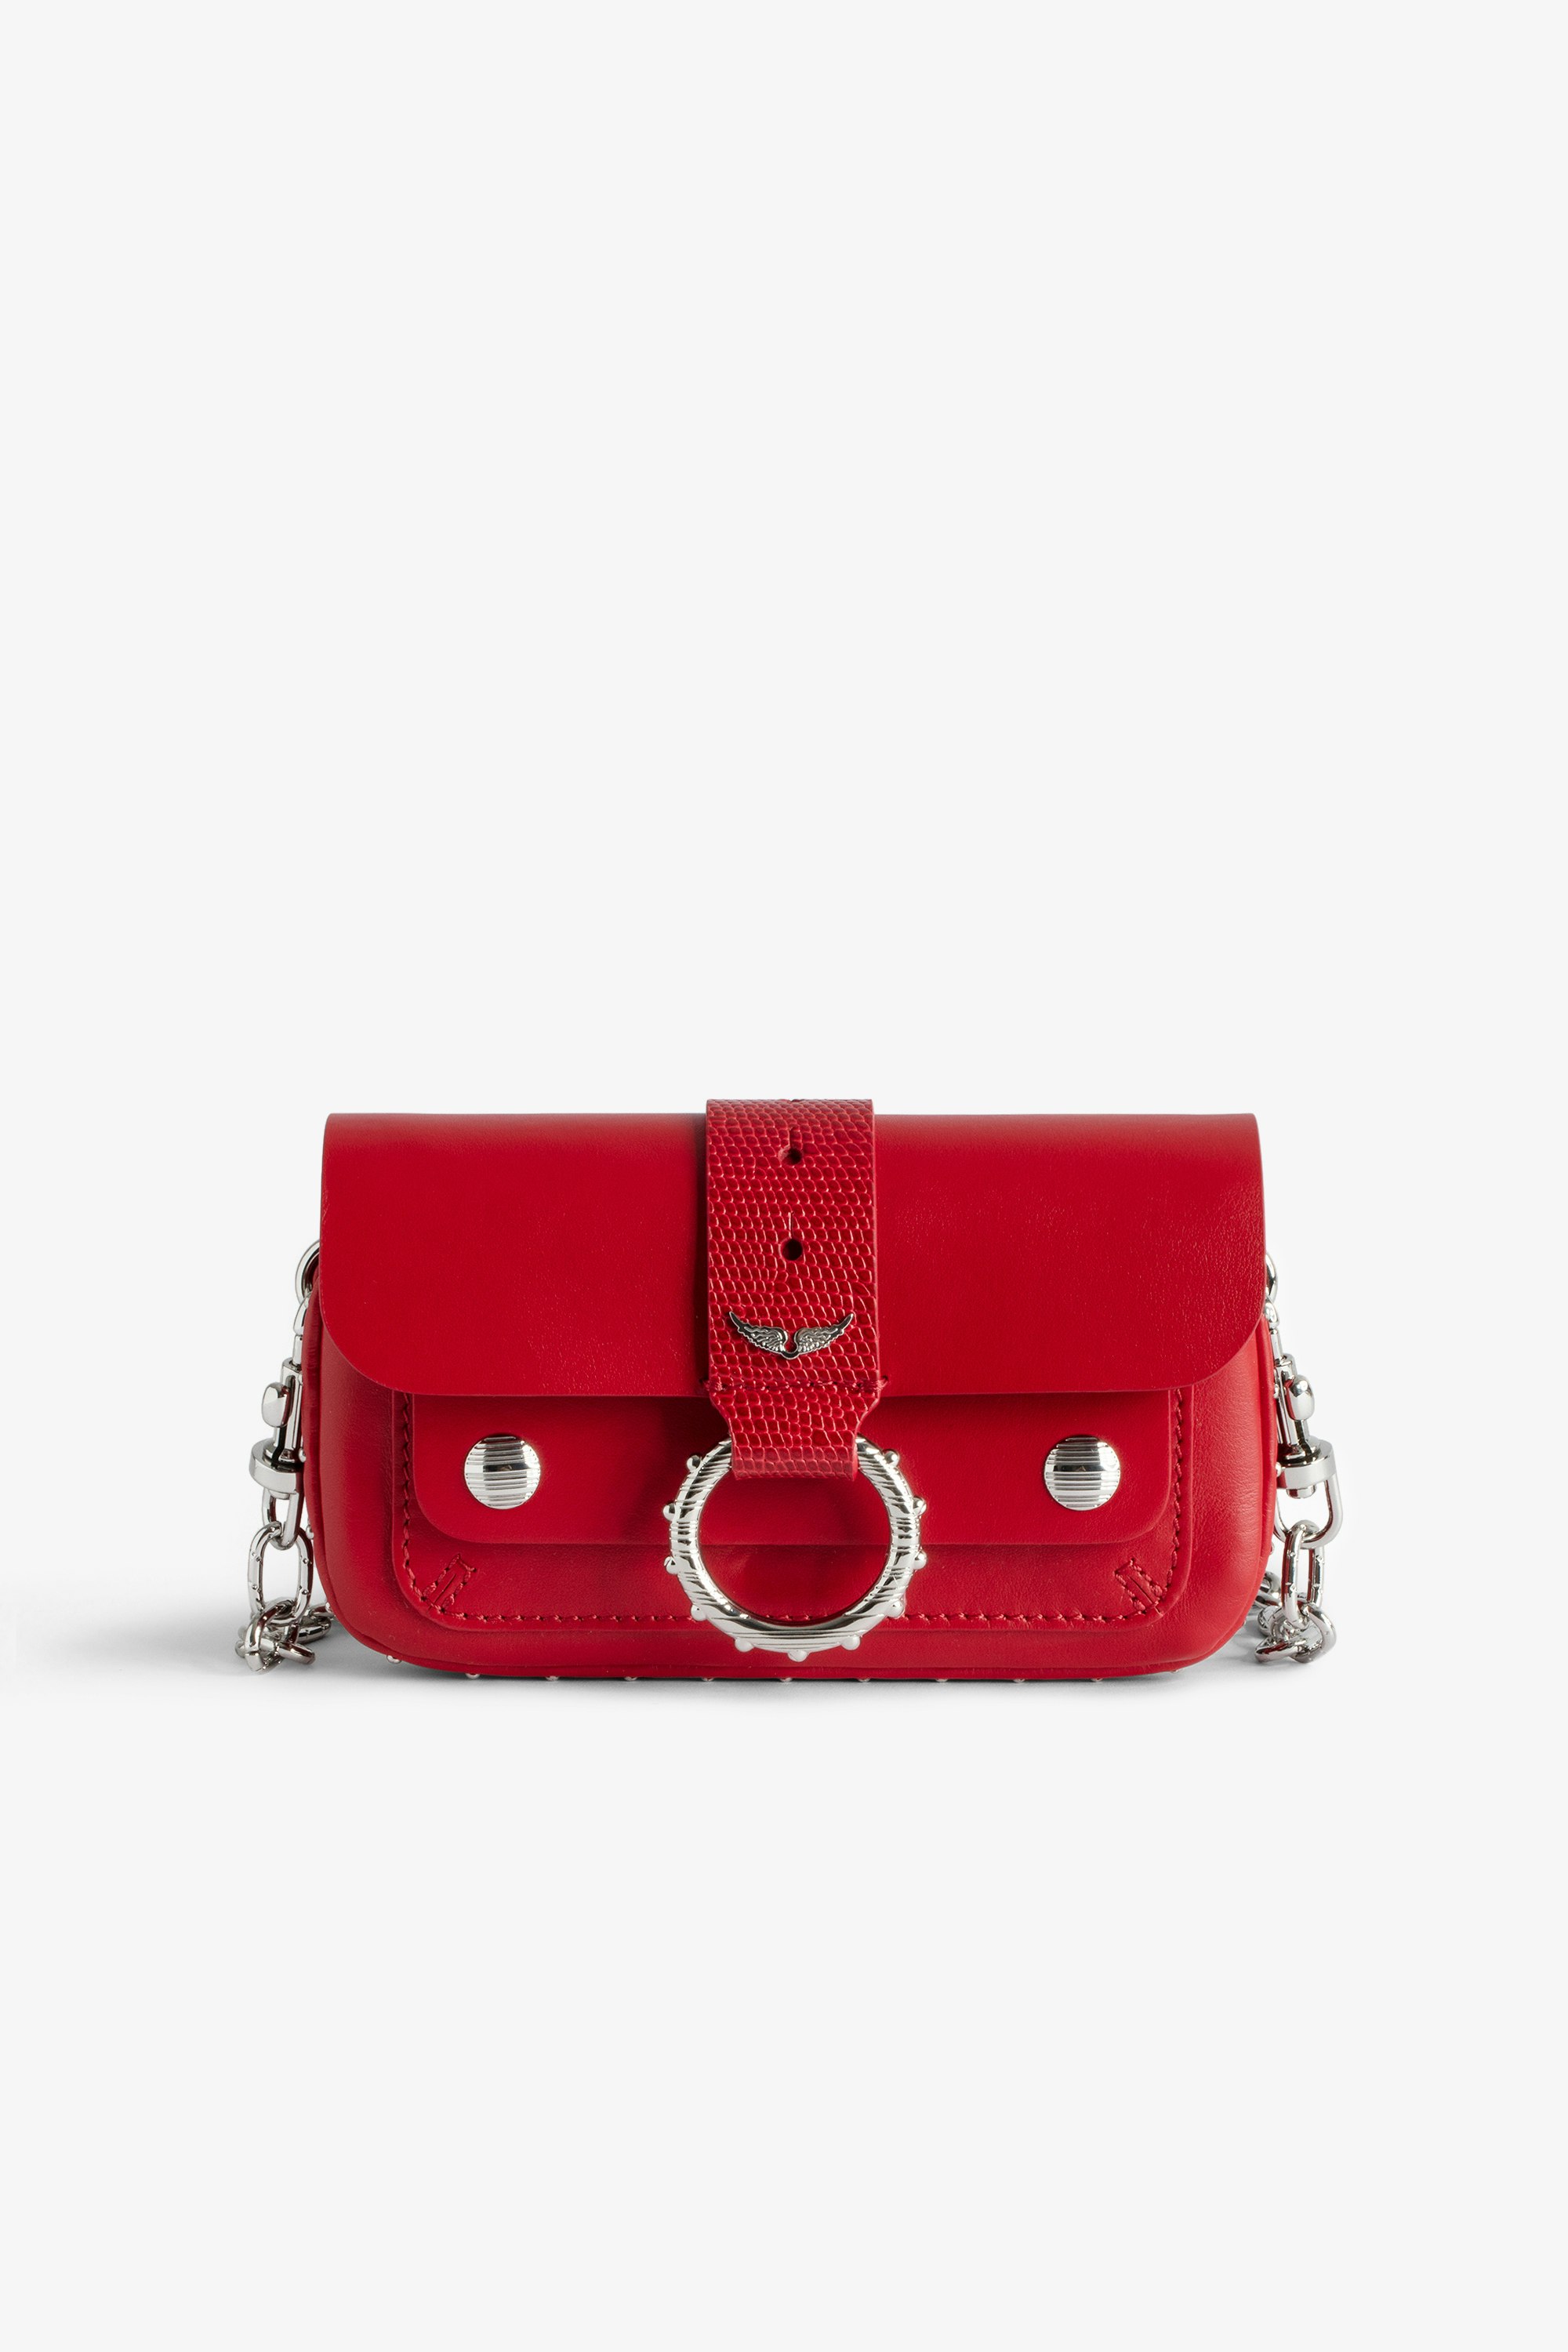 Kate Wallet Bag Women’s red smooth leather mini bag with metal chain and iguana-embossed leather loop.